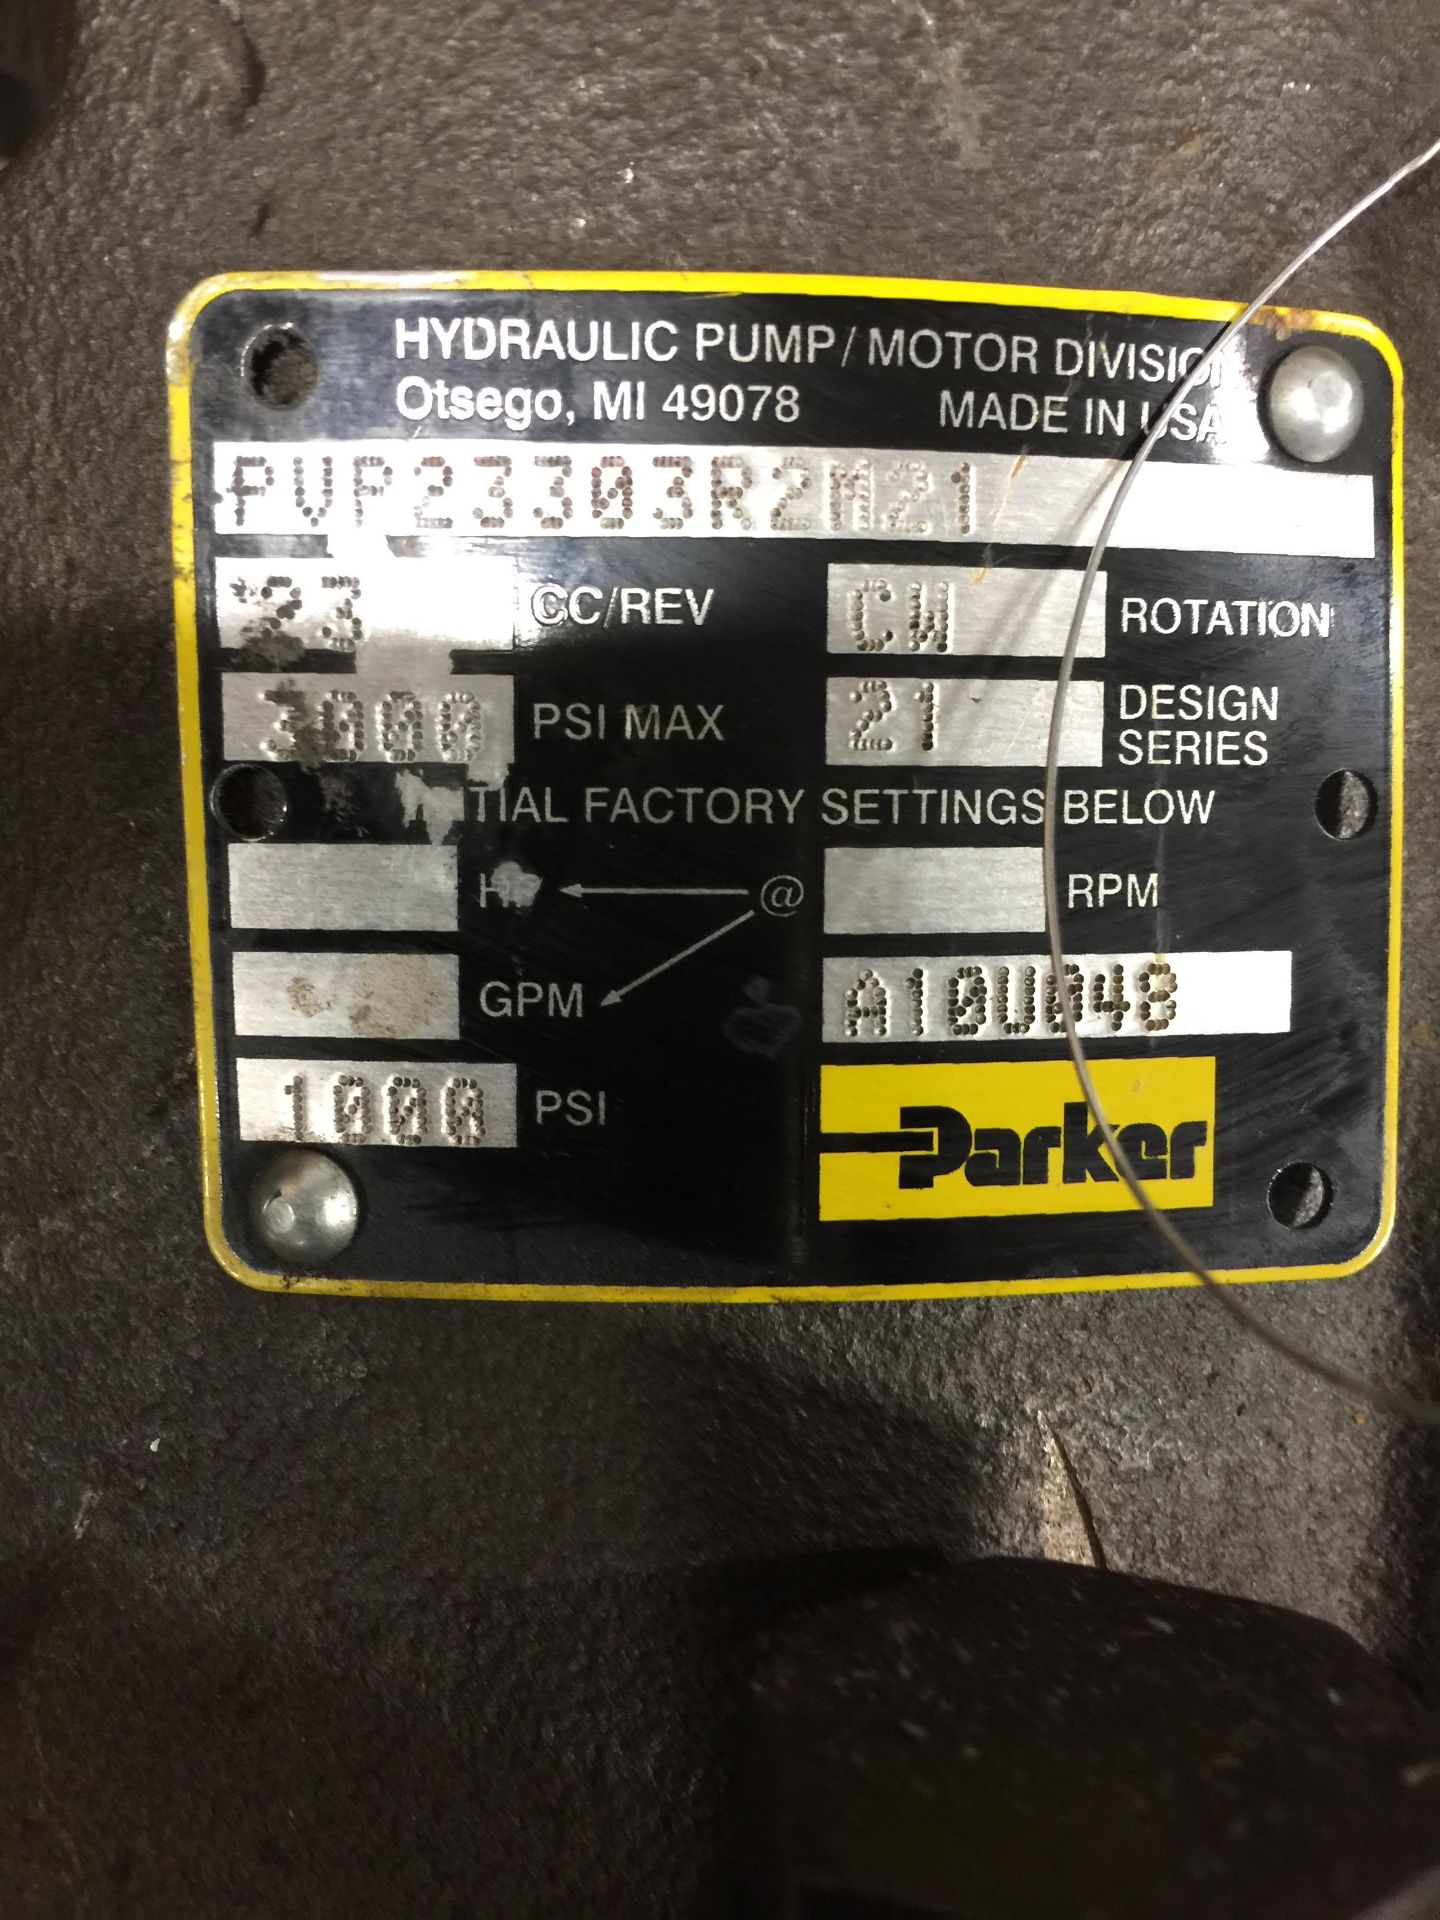 Lot of 2 Parker PVP1630L212 and PVP23303R2M21 Hydraulic Pumps - Image 3 of 3